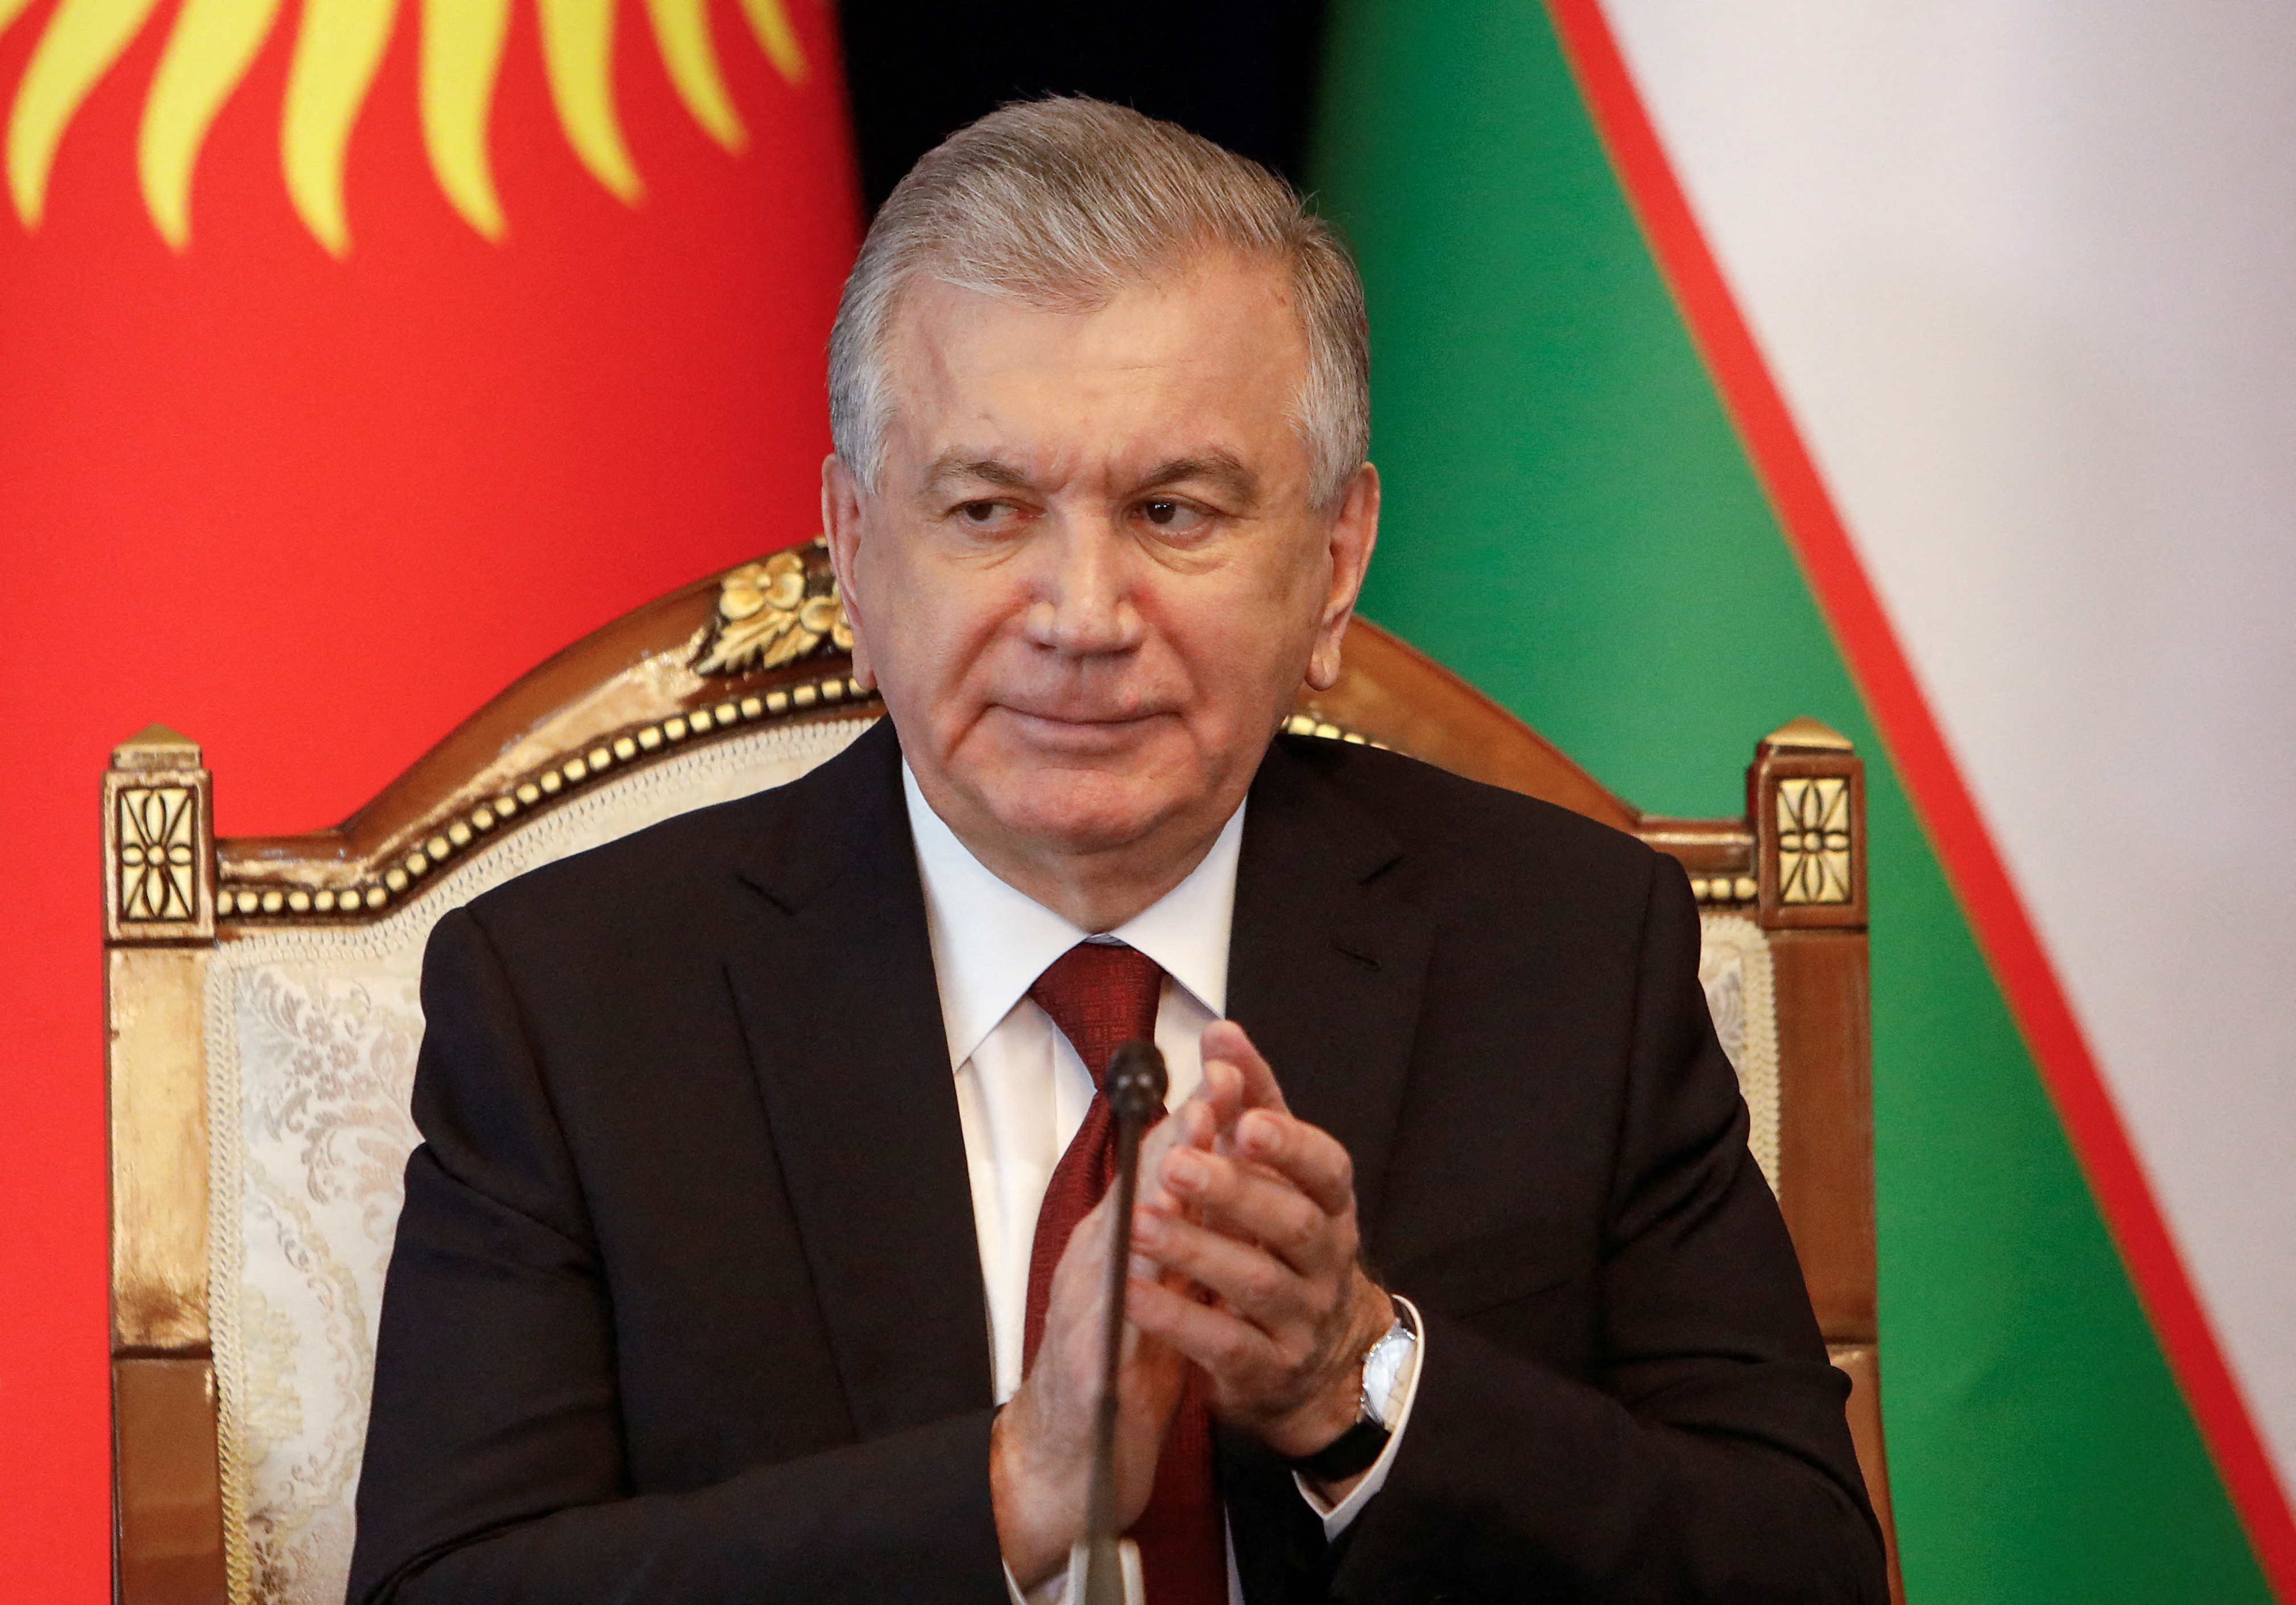 Uzbek President Shavkat Mirziyoyev applauds during a signing ceremony and news conference while on a visit to Bishkek, Kyrgyzstan